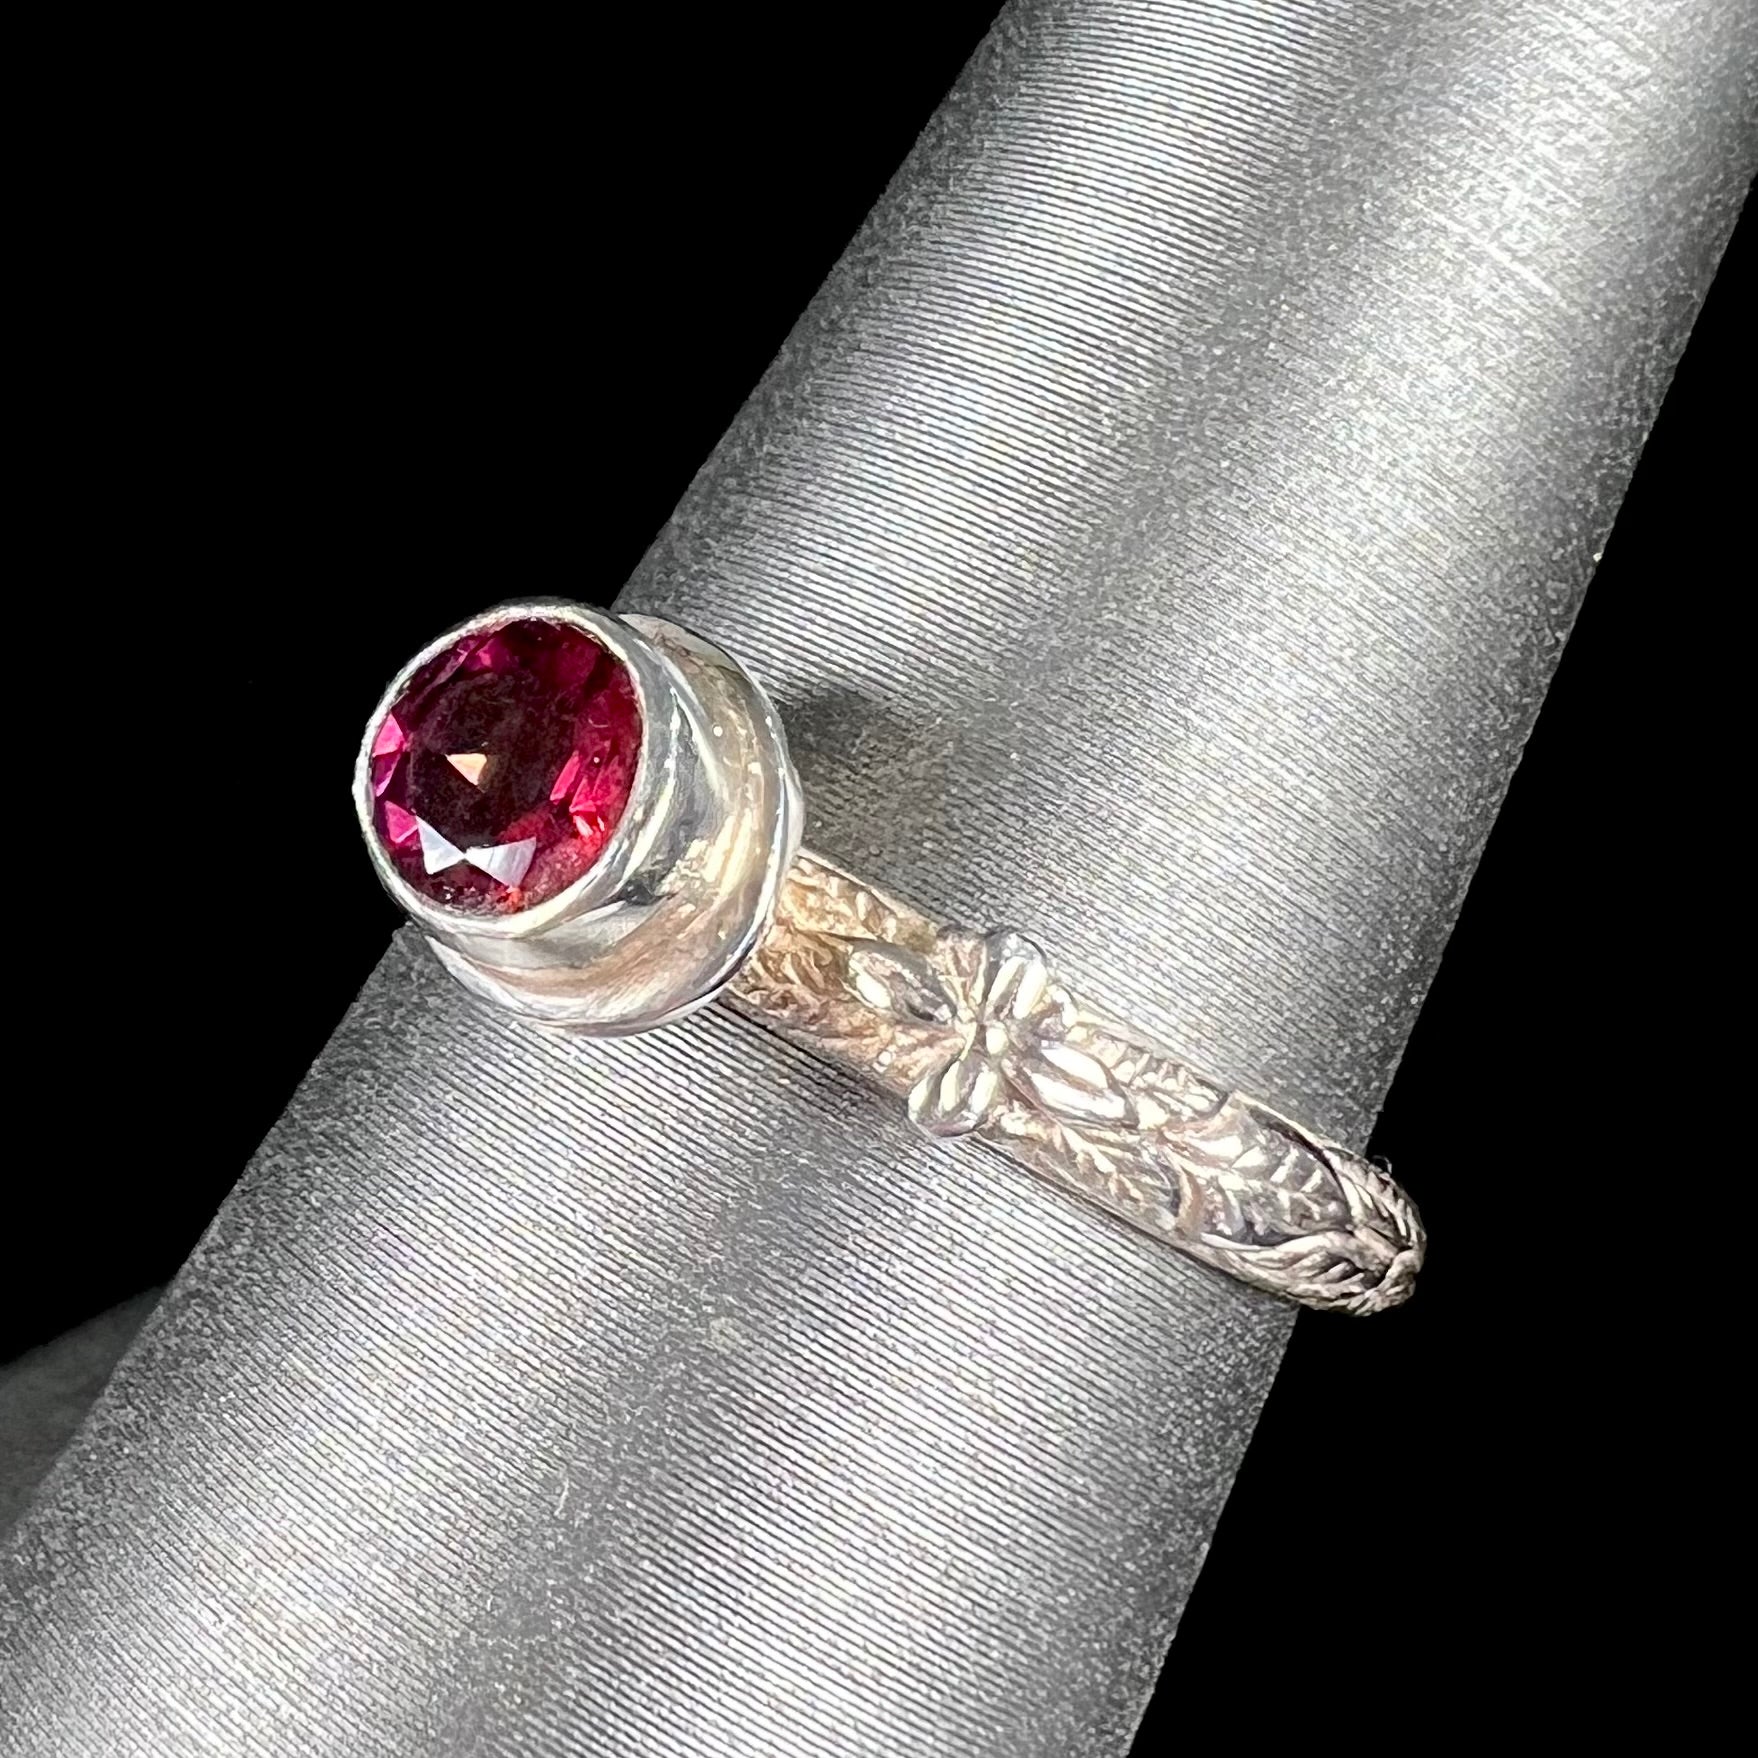 A ladies' sterling silver purple rhodonite garnet solitaire ring.  The shank has an etched floral leaf design.